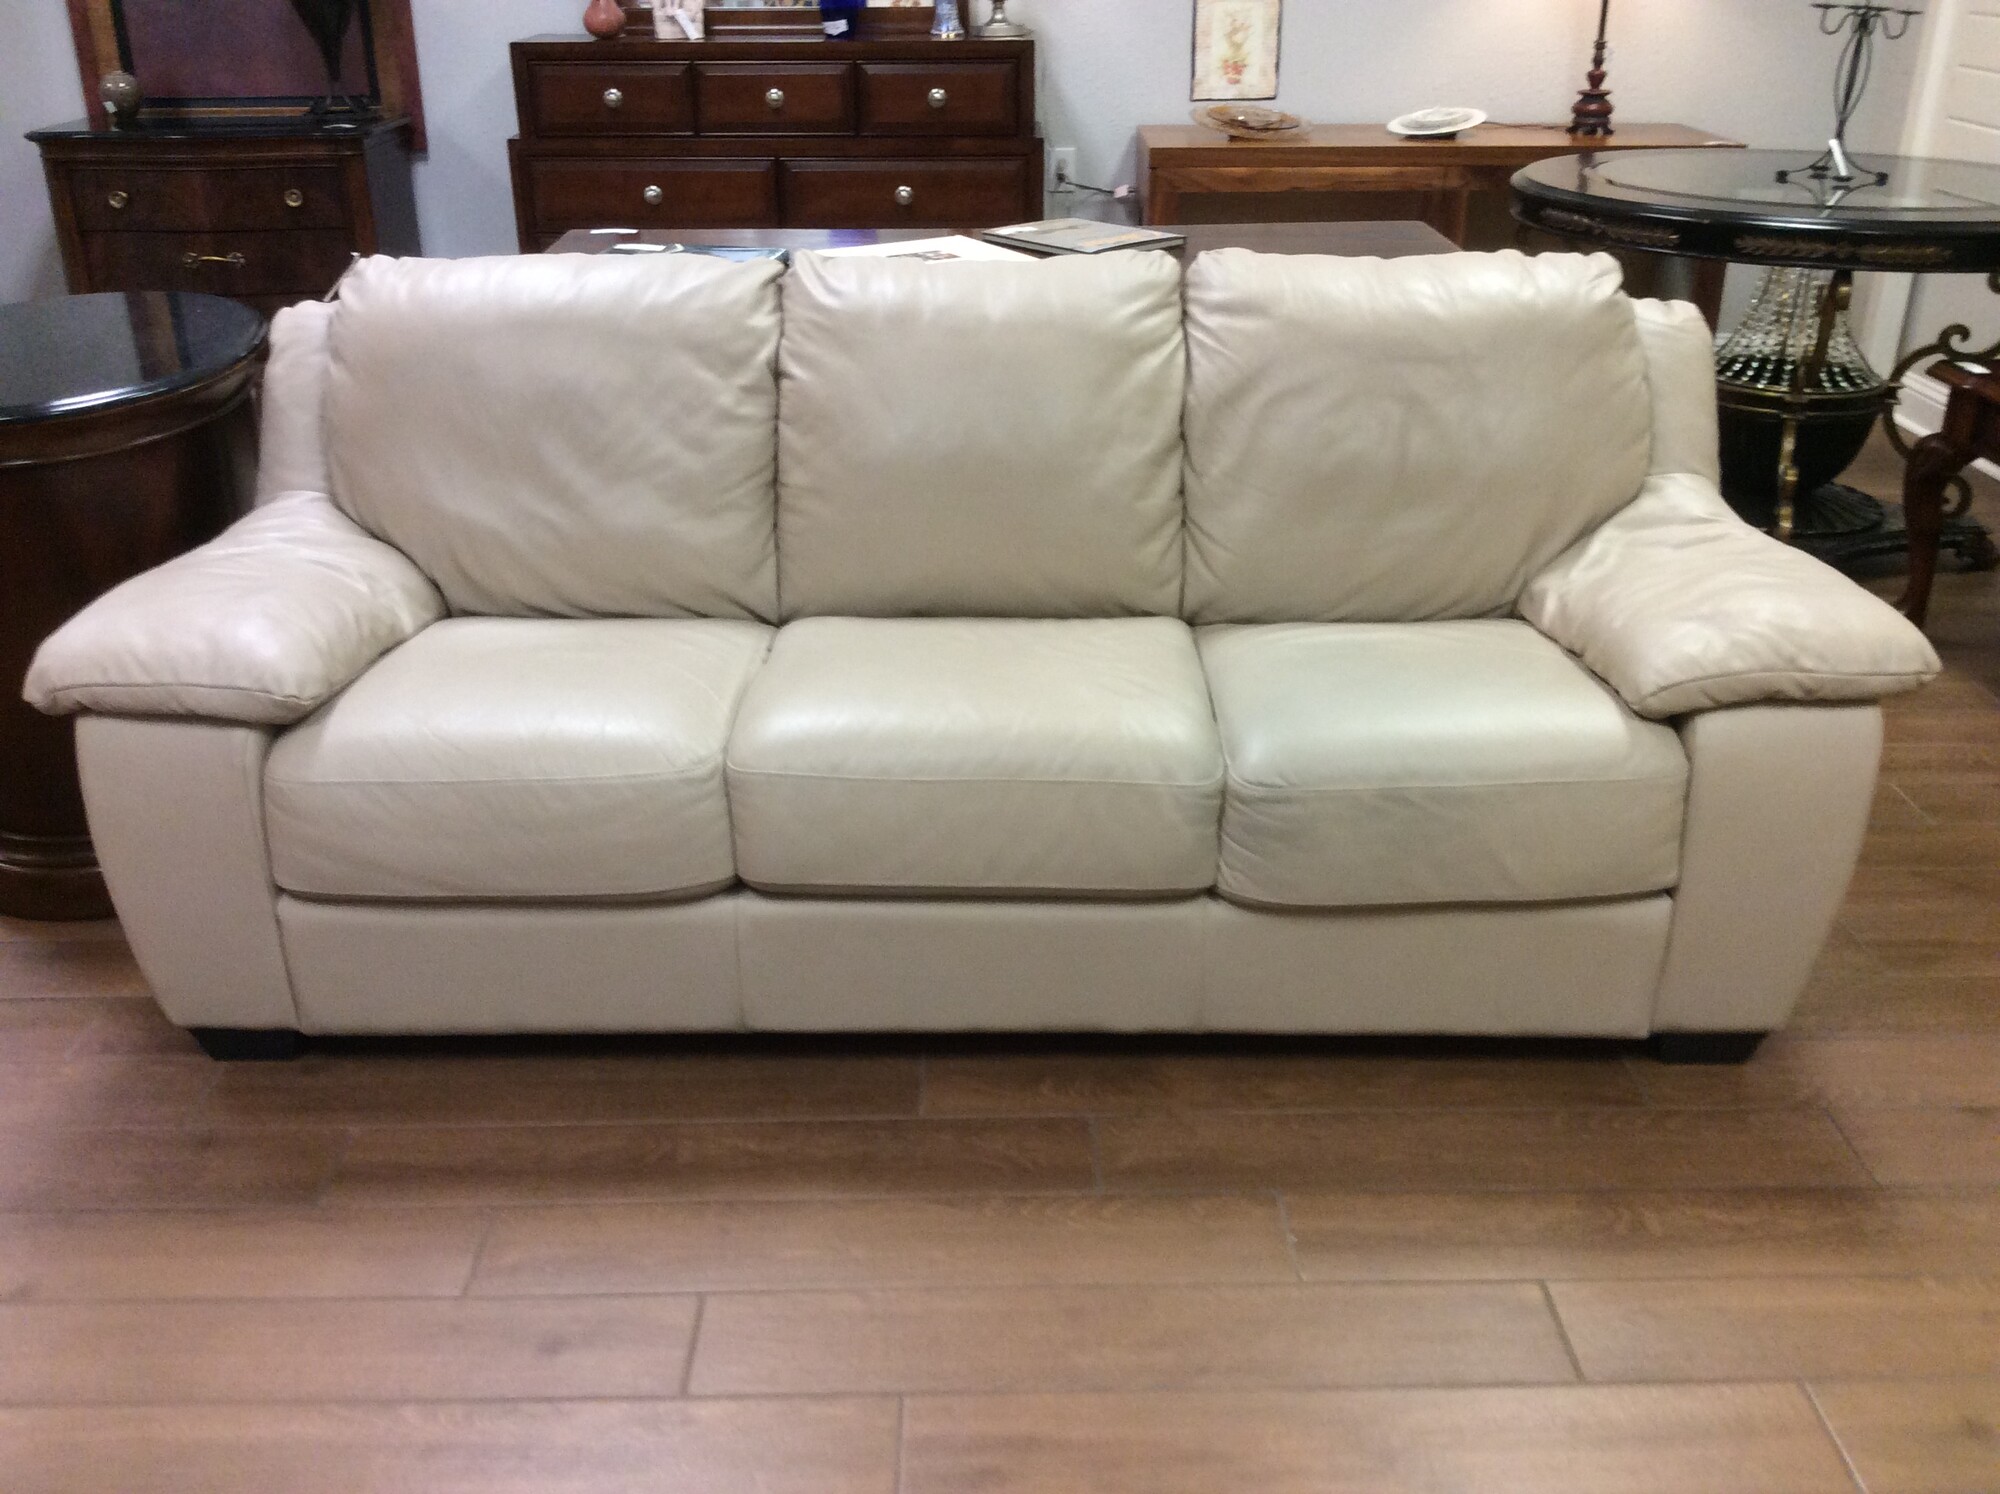 This is a very nice La Z Boy 3 seater sofa. This sofa is a tan leather and very comfortable.